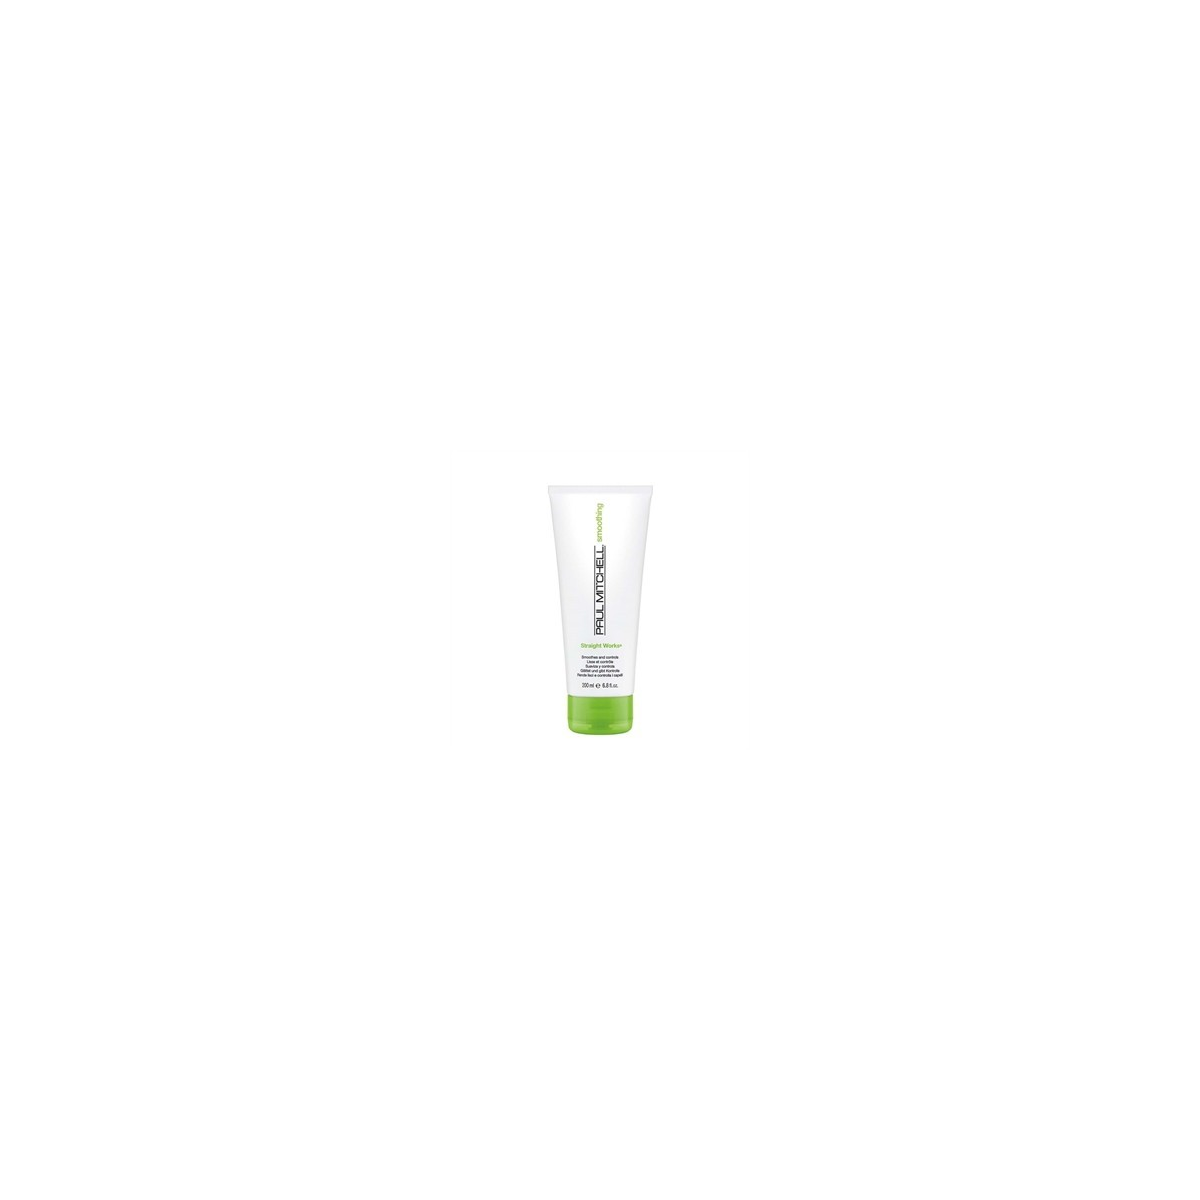 PAUL MITCHELL - SMOOTHING - Straight Works (200ml) Gel Lisciante